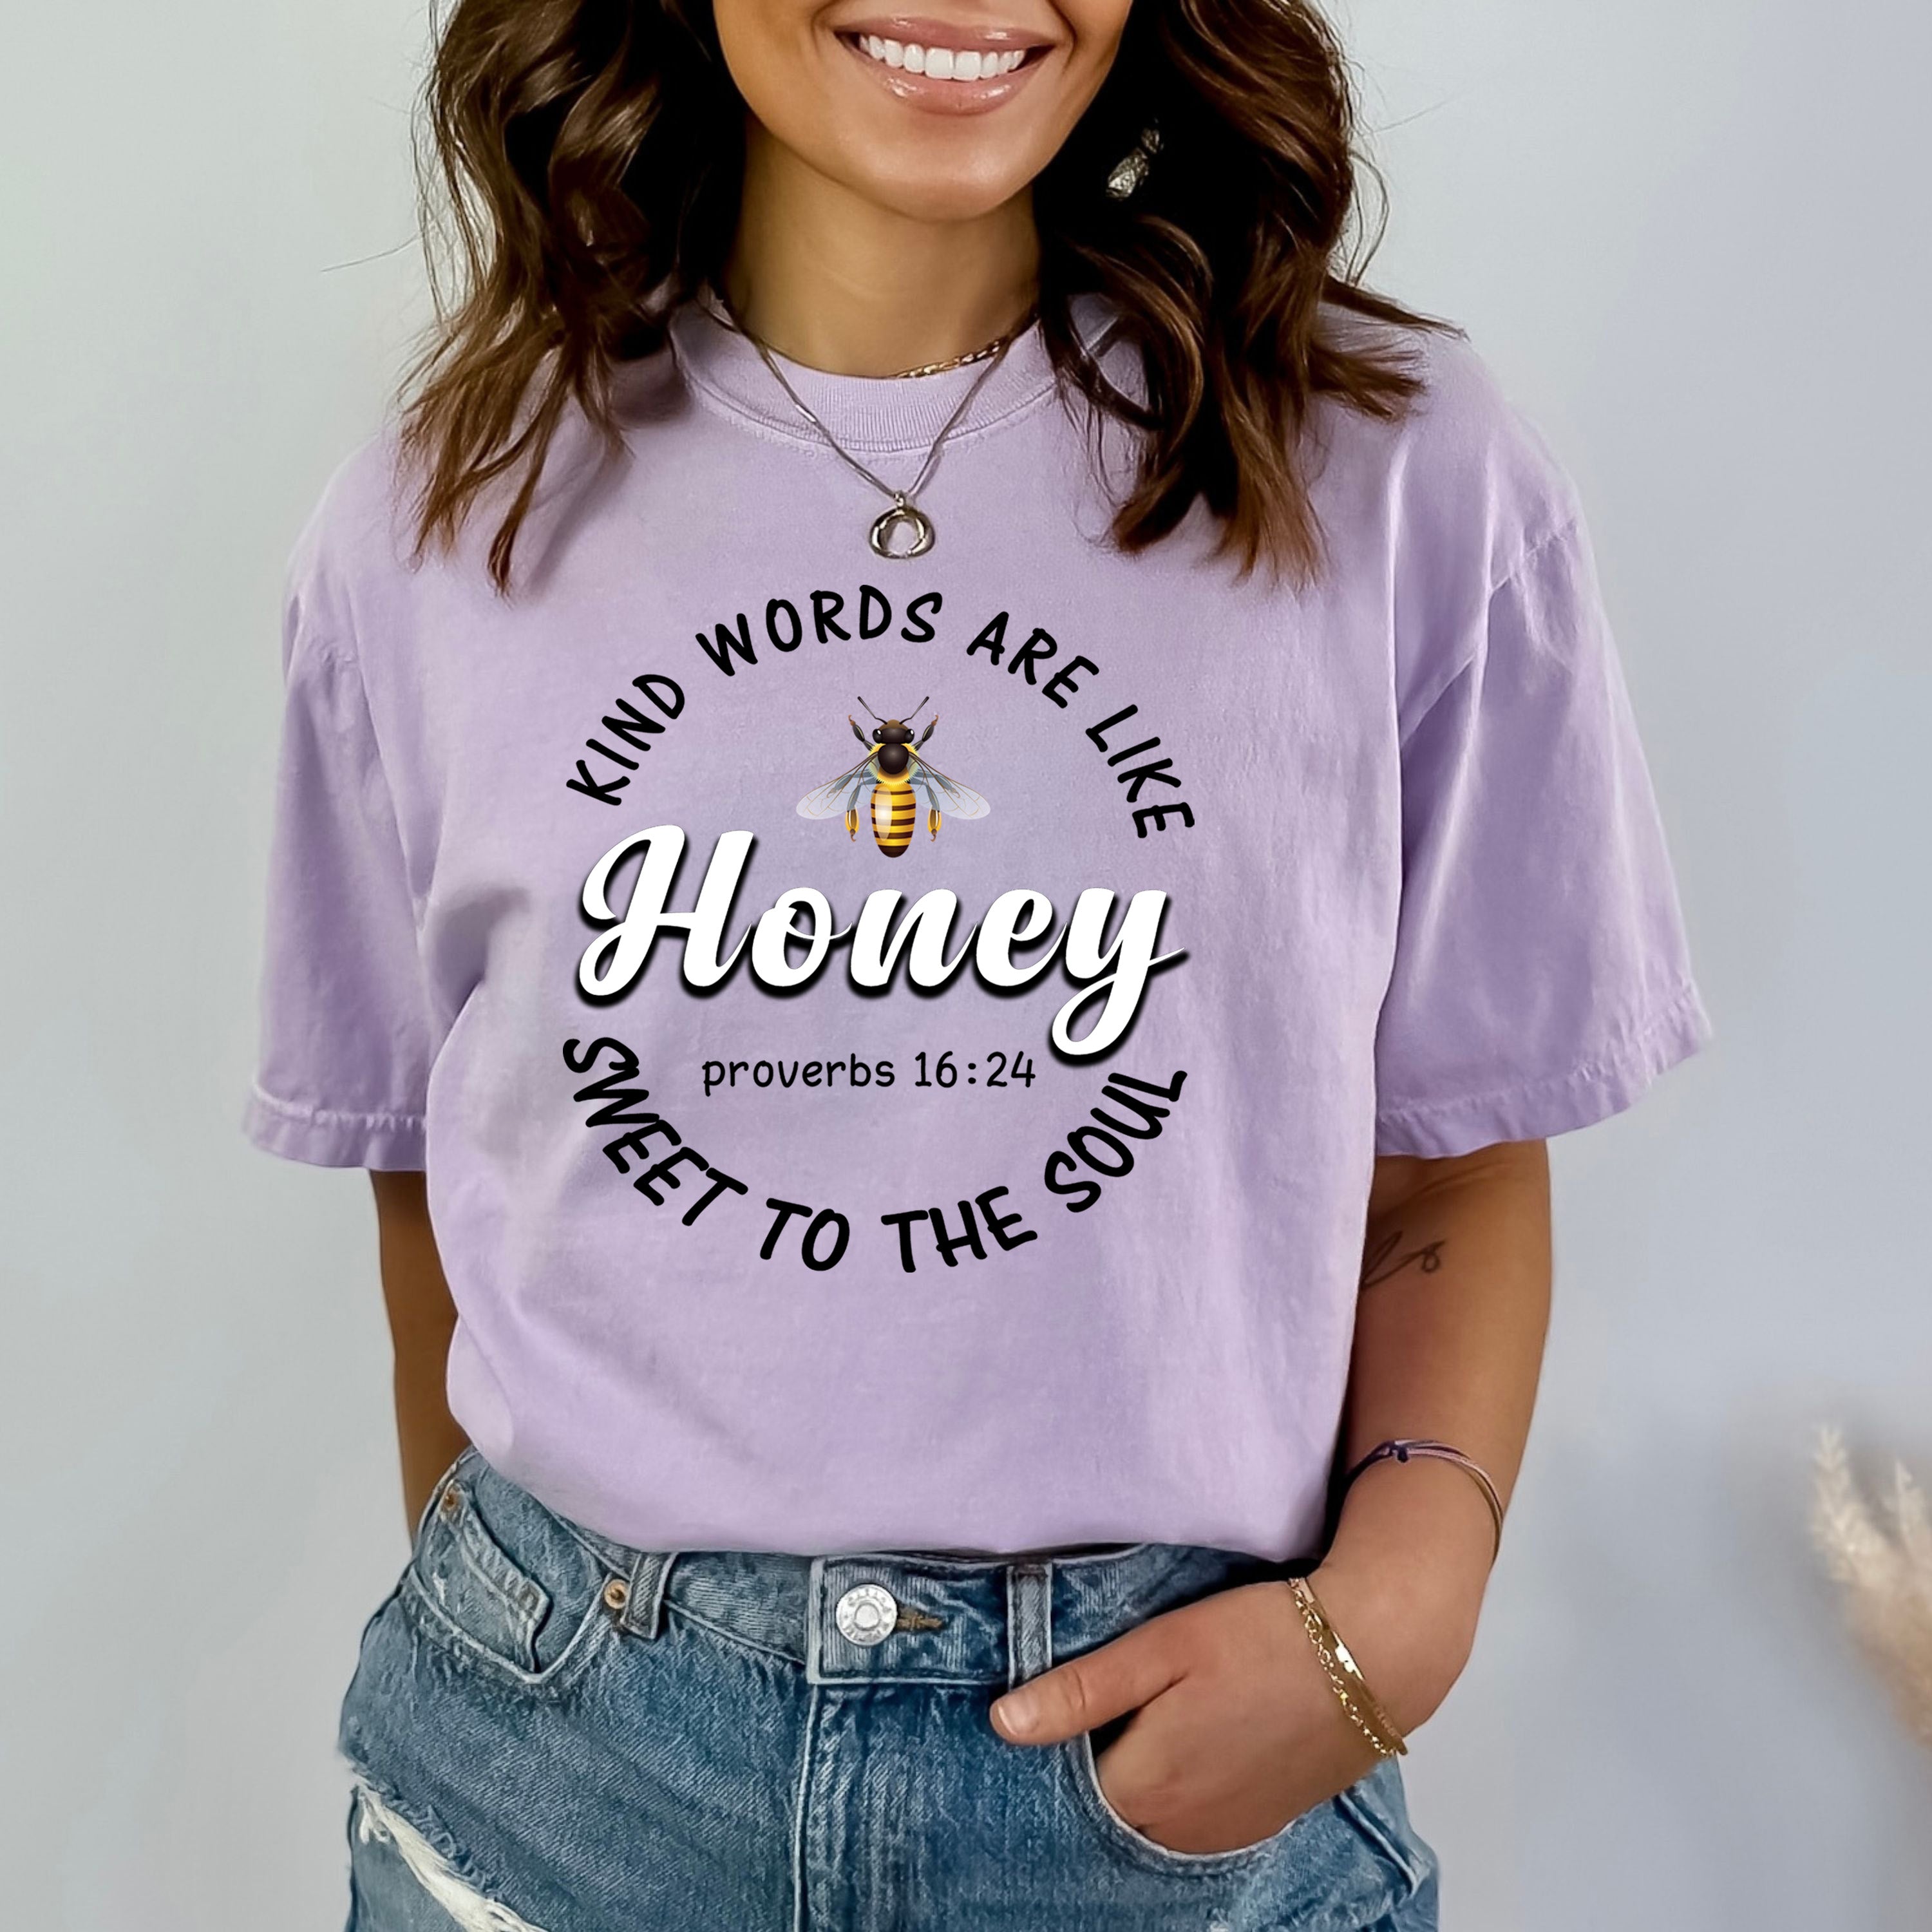 Kind Words Are Like Honey - Bella canvas